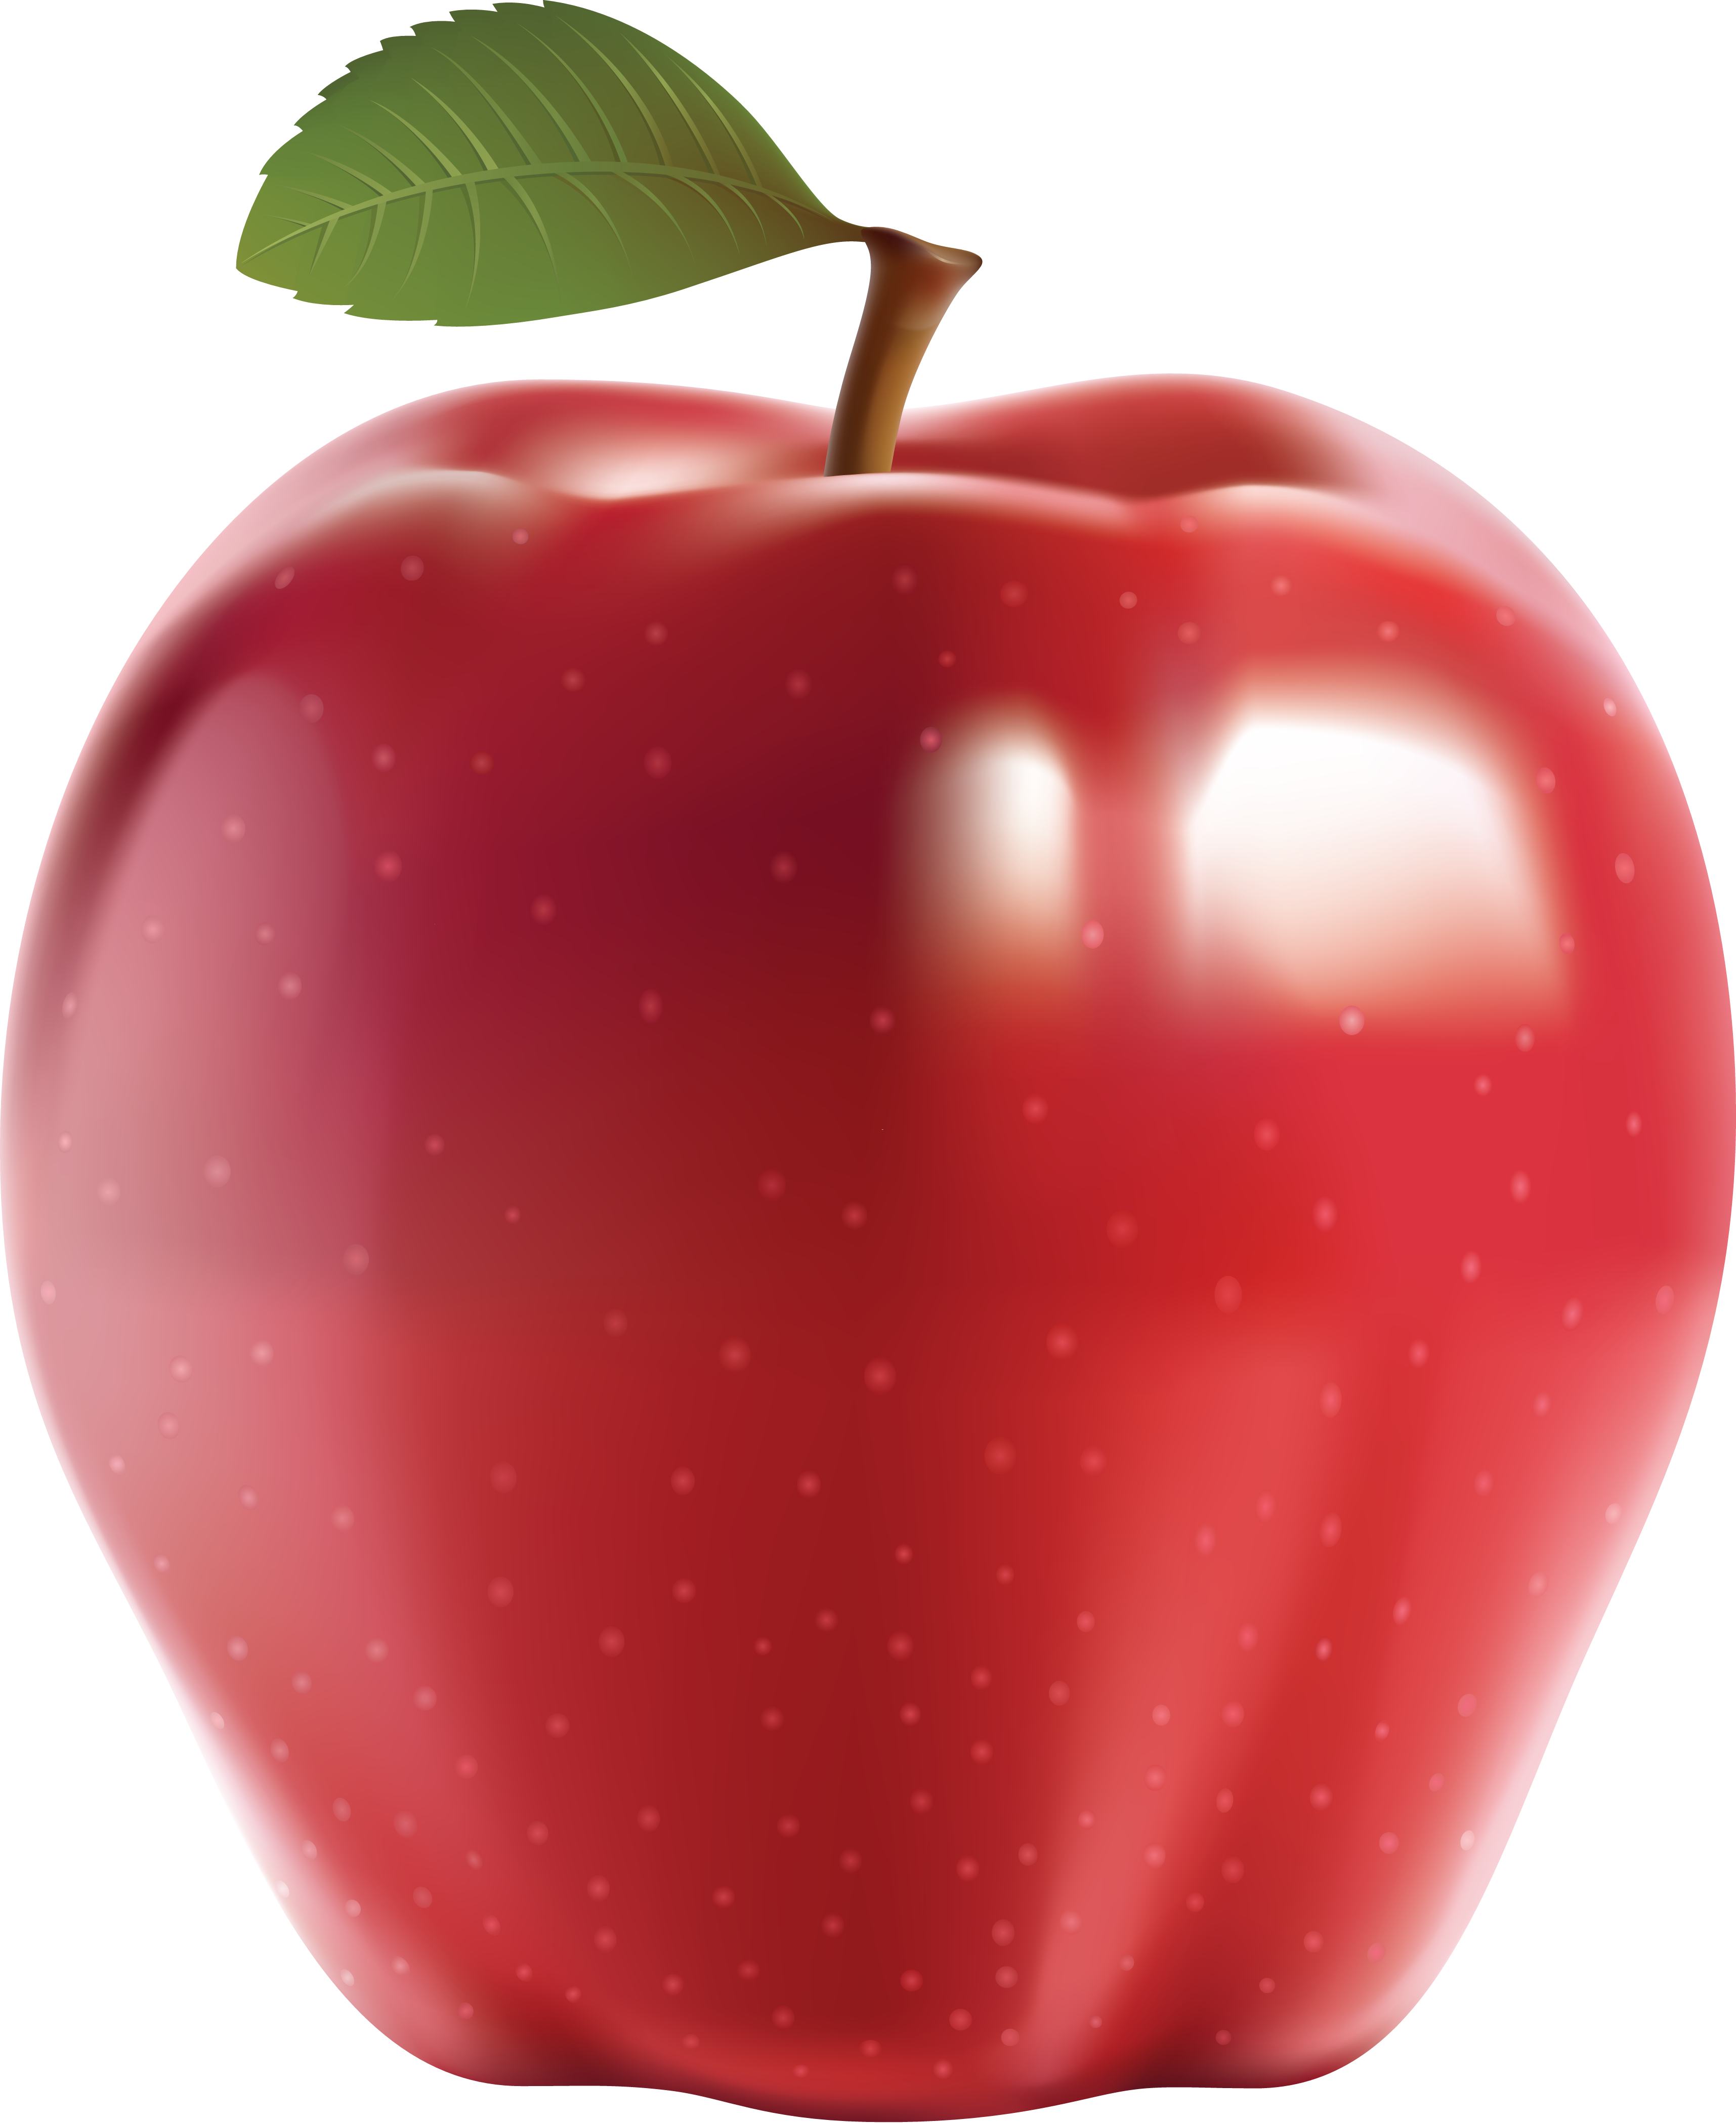 Red Apple Animated